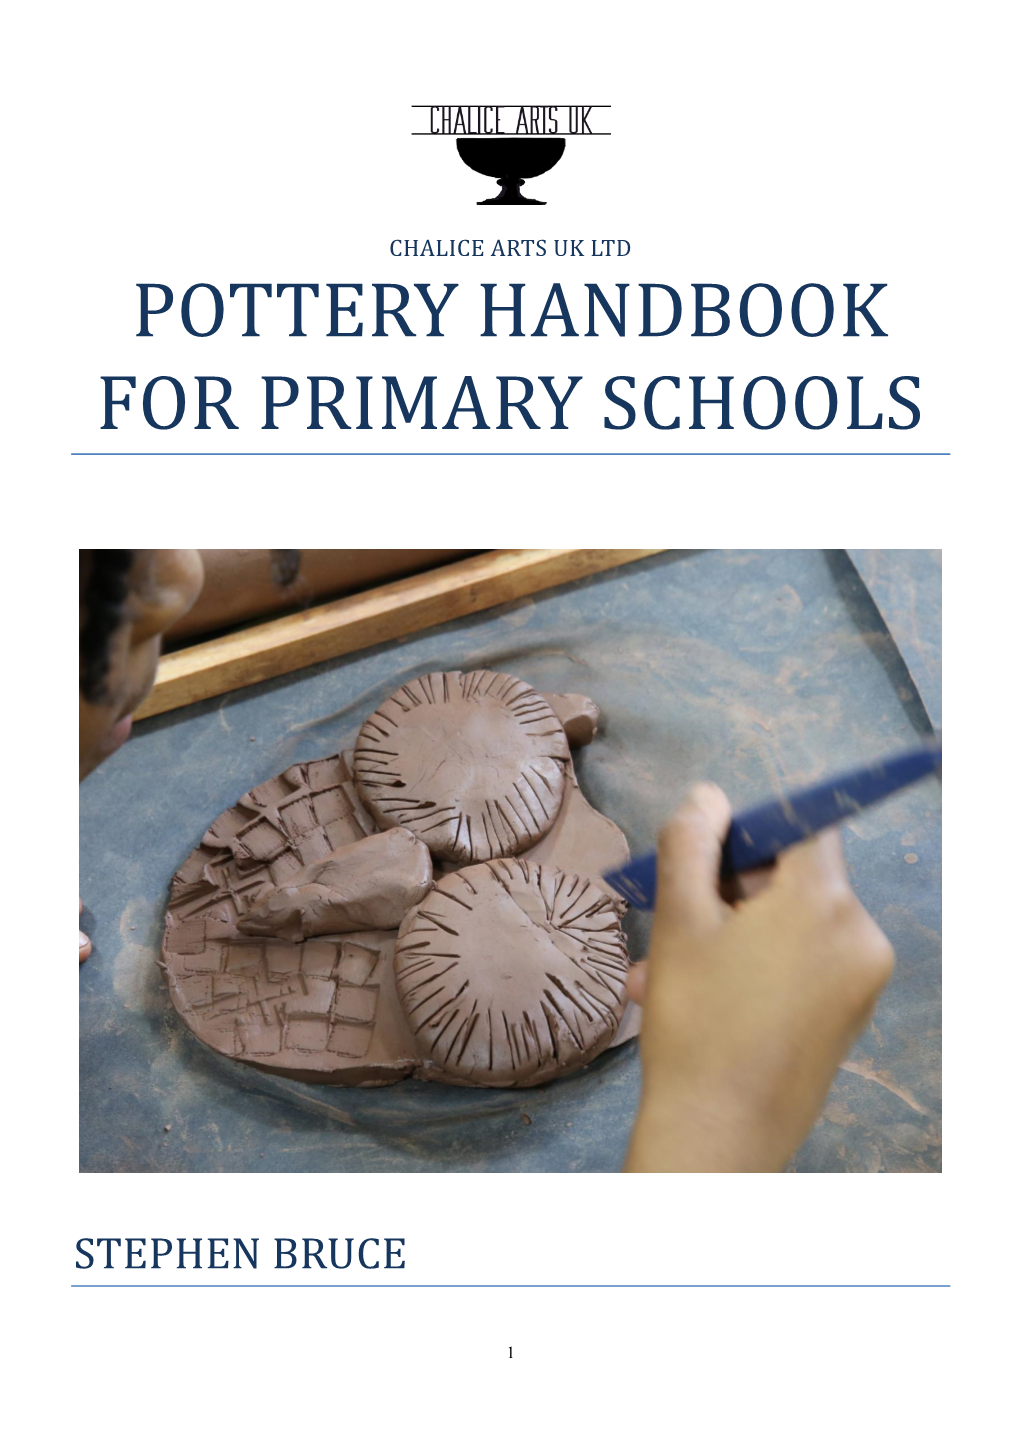 Pottery Handbook for Primary Schools by Stephen Bruce 2015